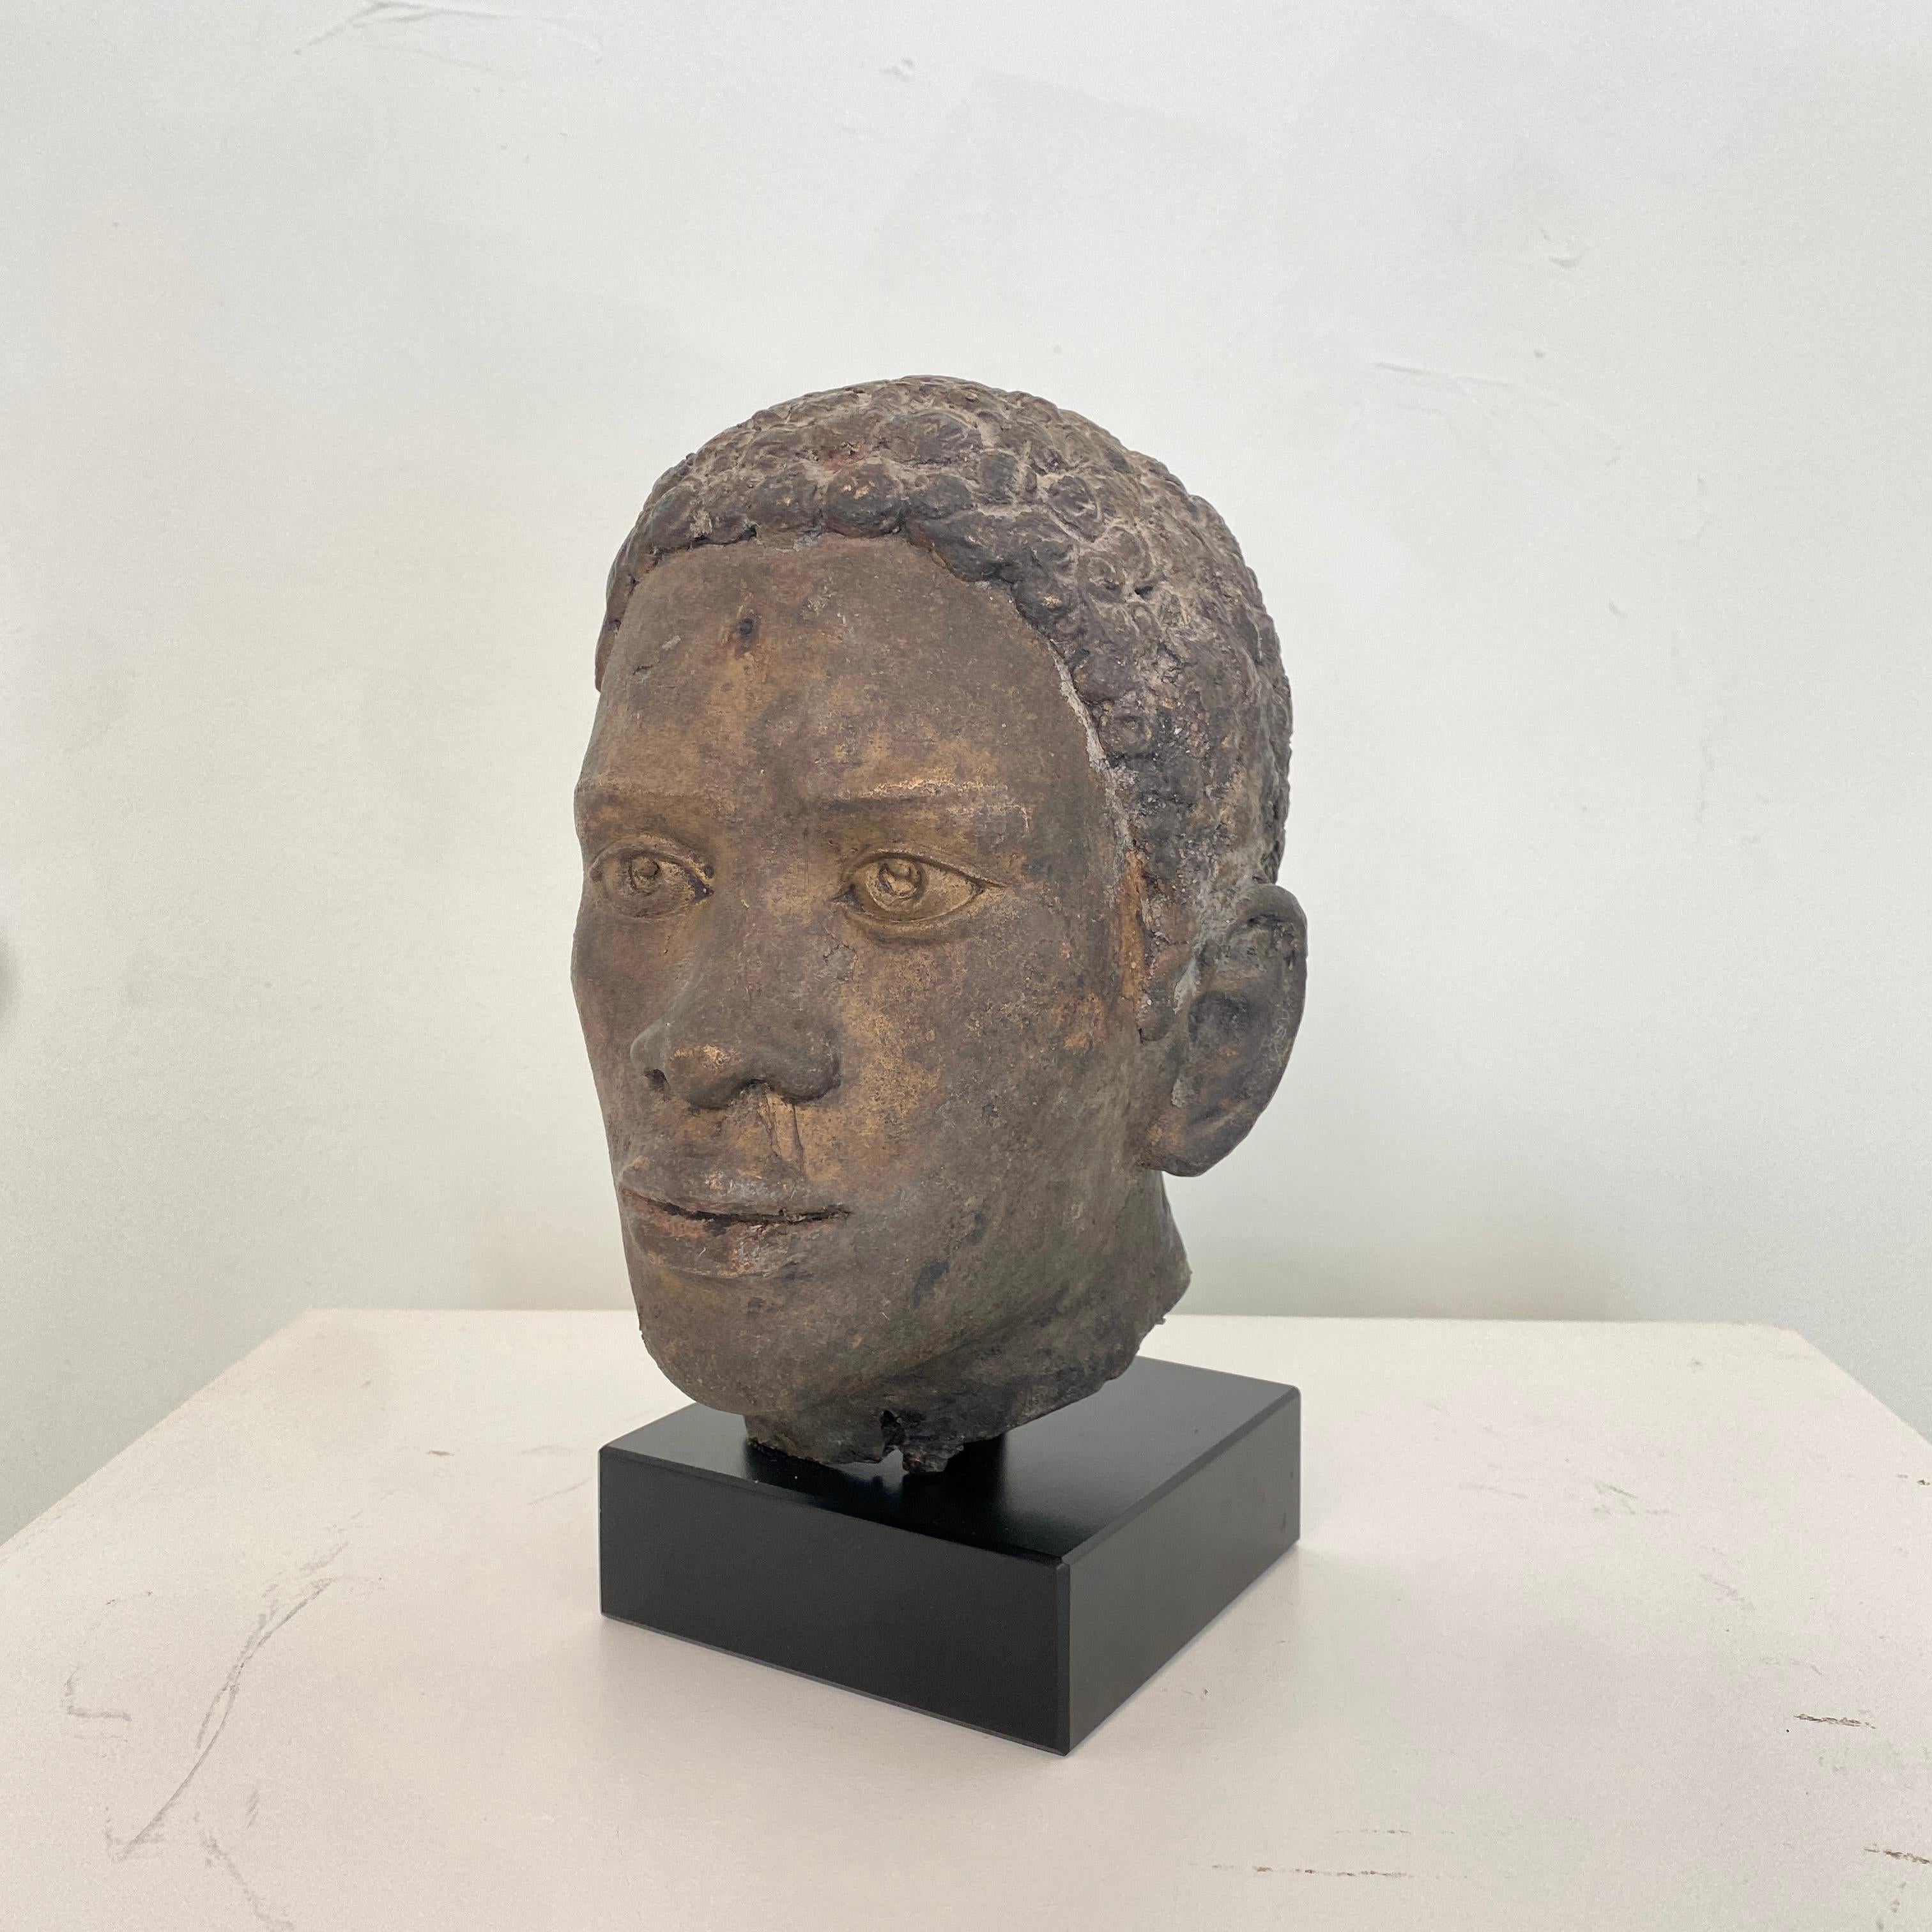 This early 20th century cast bronze bust of a man was made around 1920 in France.
A unique piece which is a great eye-catcher for your antique, modern, space age or mid-century interior.
If you have any more questions we are very happy to help and